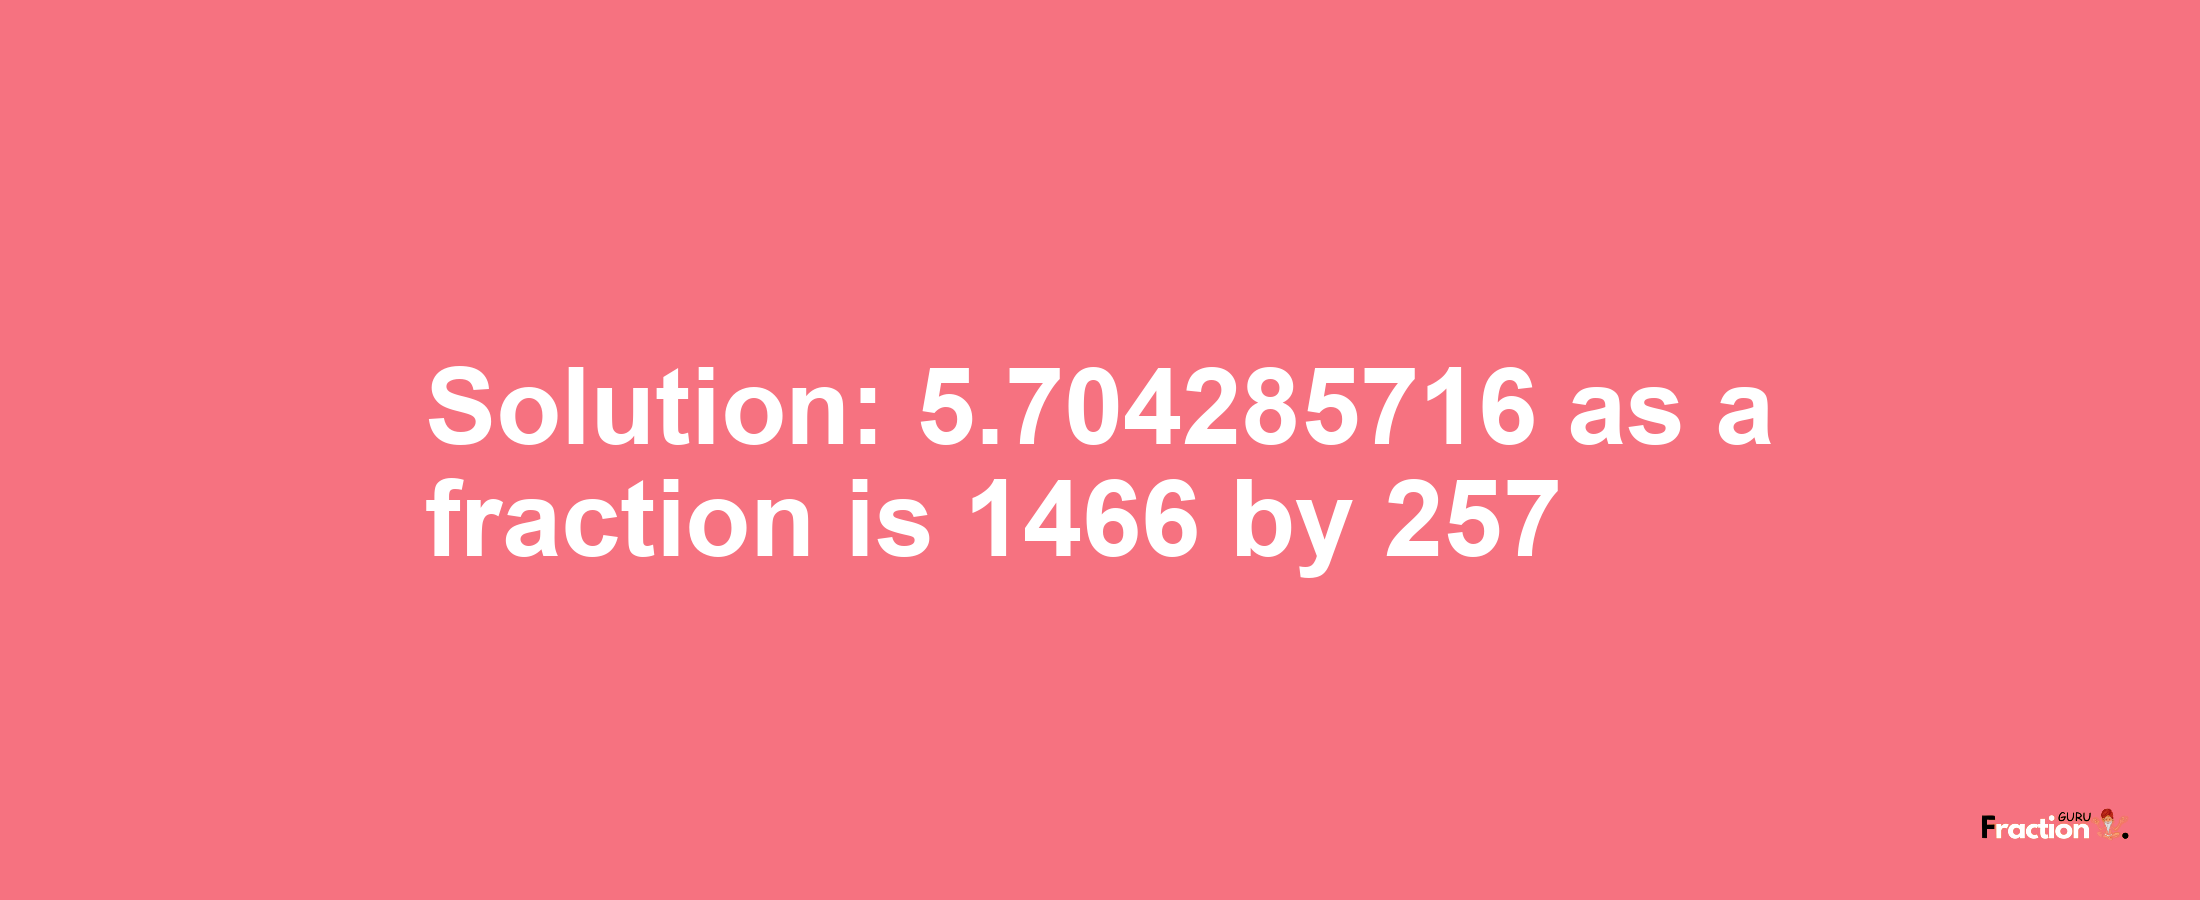 Solution:5.704285716 as a fraction is 1466/257